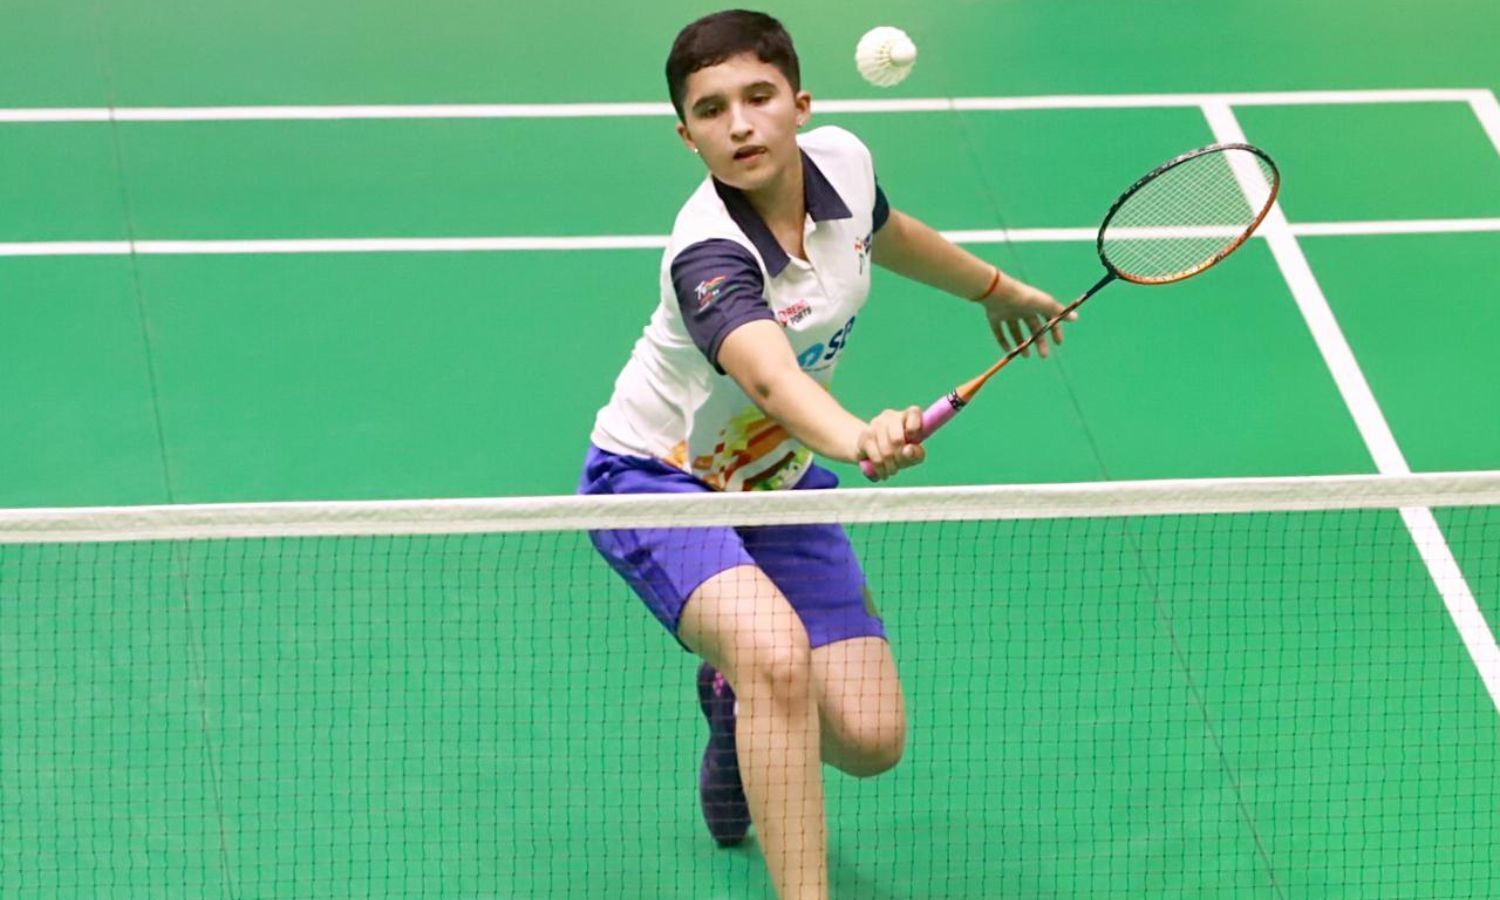 How to make a badminton career in India?